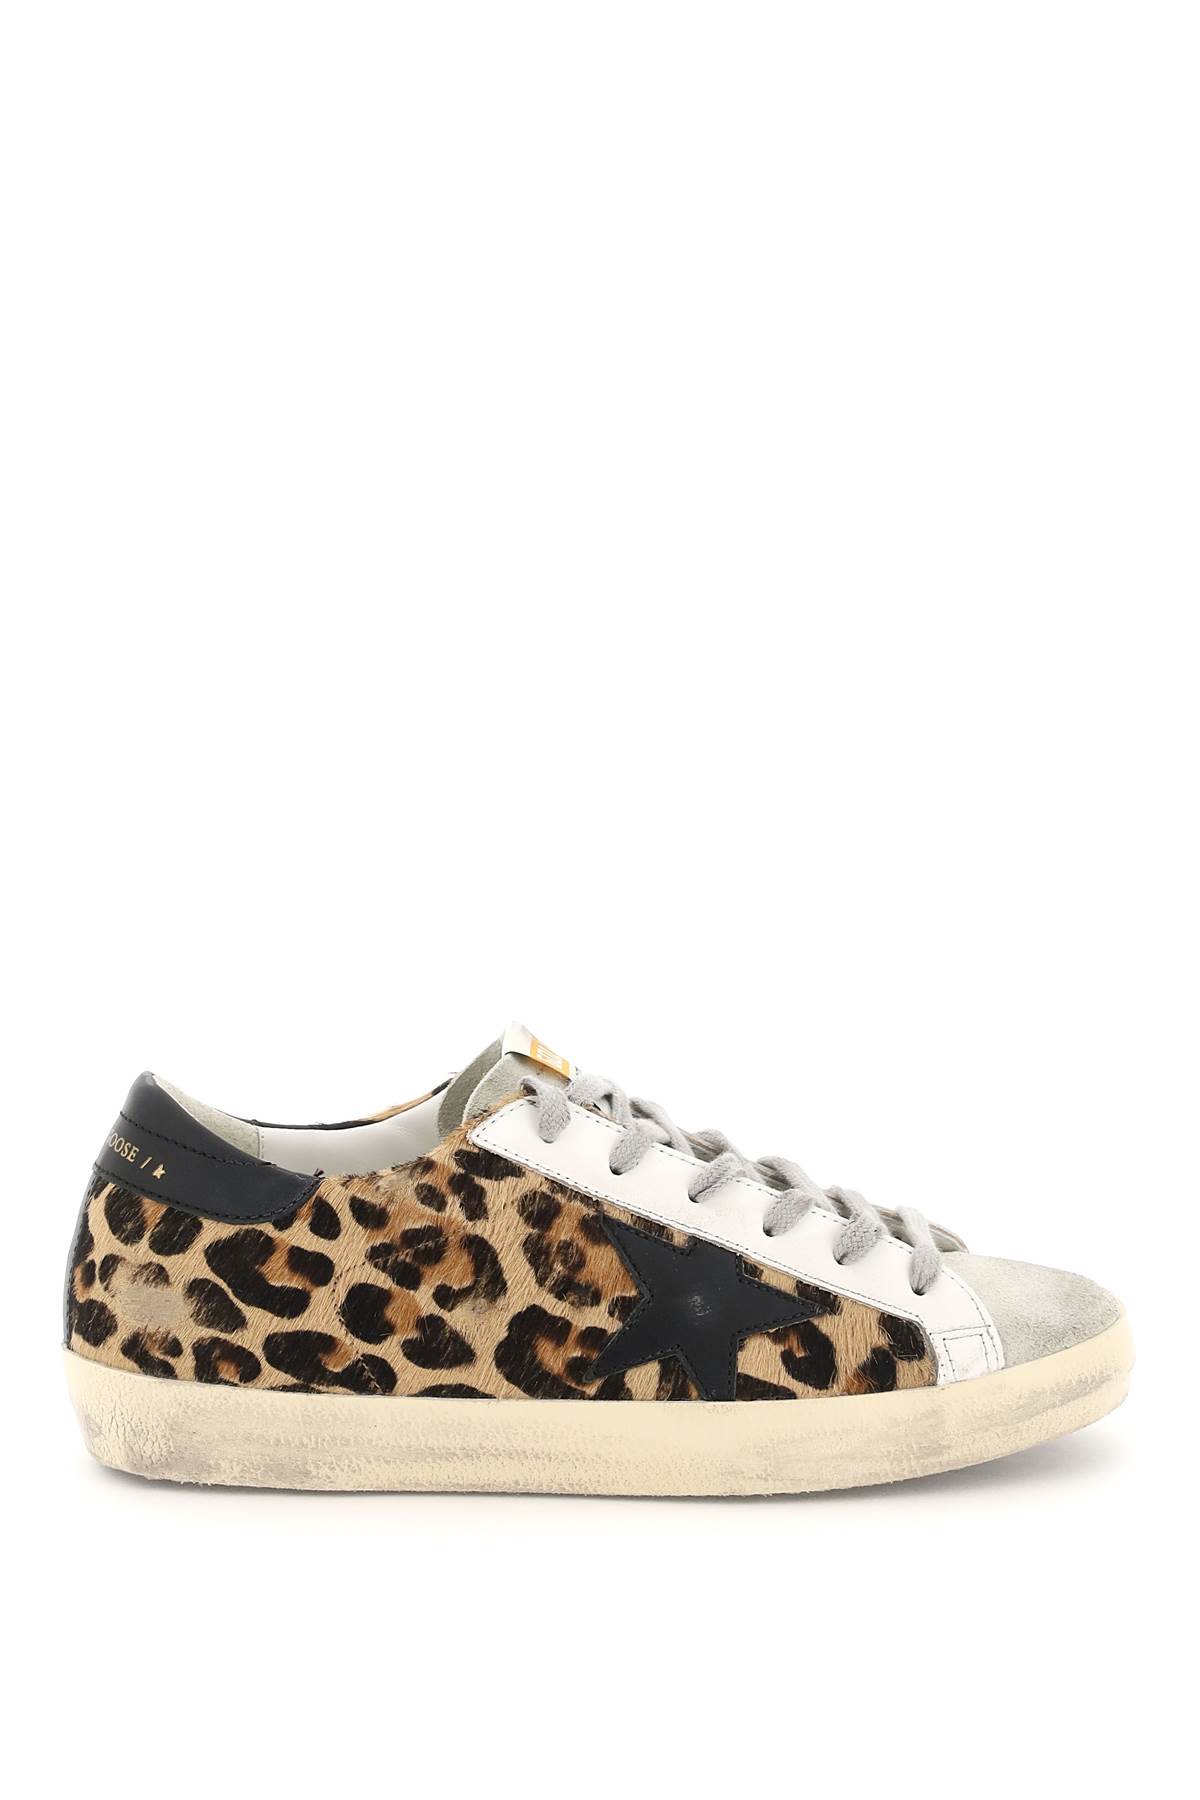 GOLDEN GOOSE LEATHER SUPER-STAR SNEAKERS